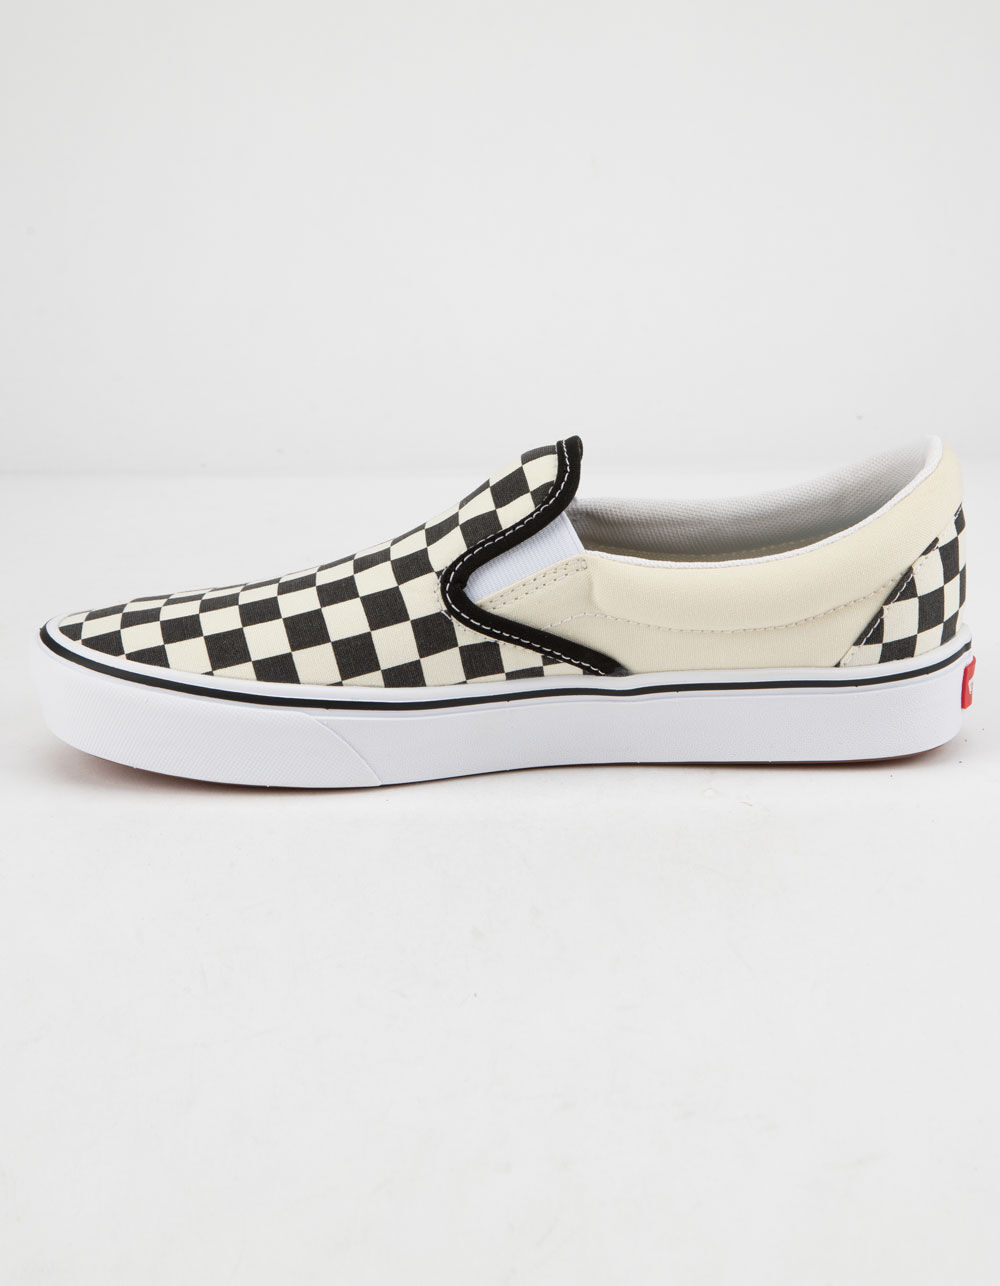 VANS ComfyCush Checkerboard Classic Slip-On Shoes - CHECKERBOARD | Tillys